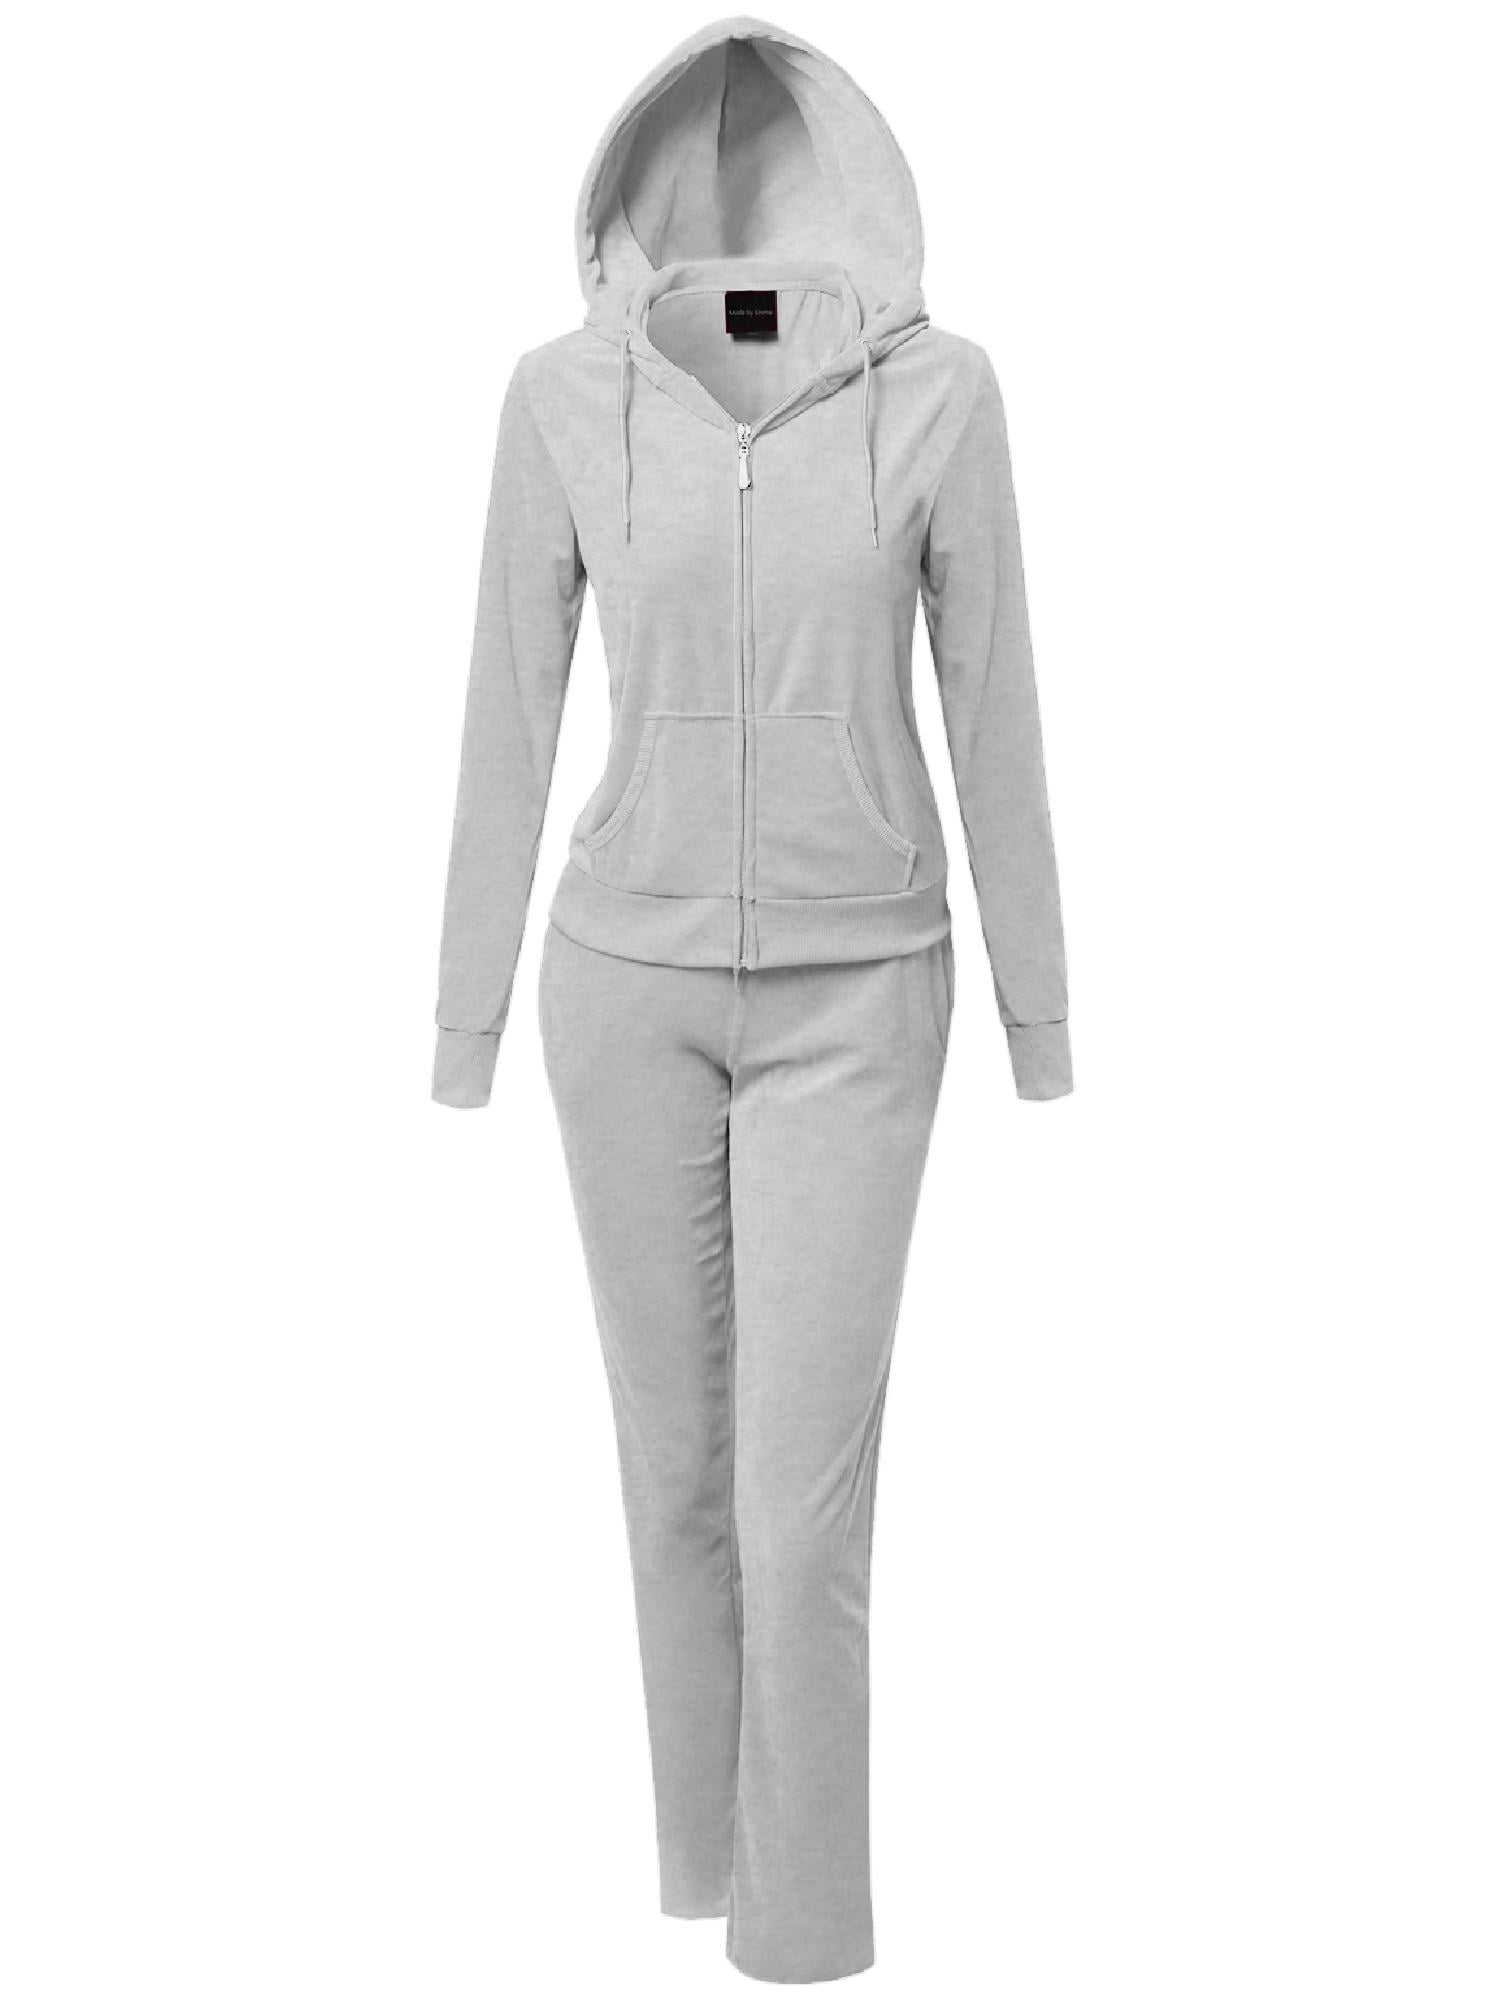 FashionOutfit Women's Solid Soft Velour Zip-Up Hoodie Workout ...